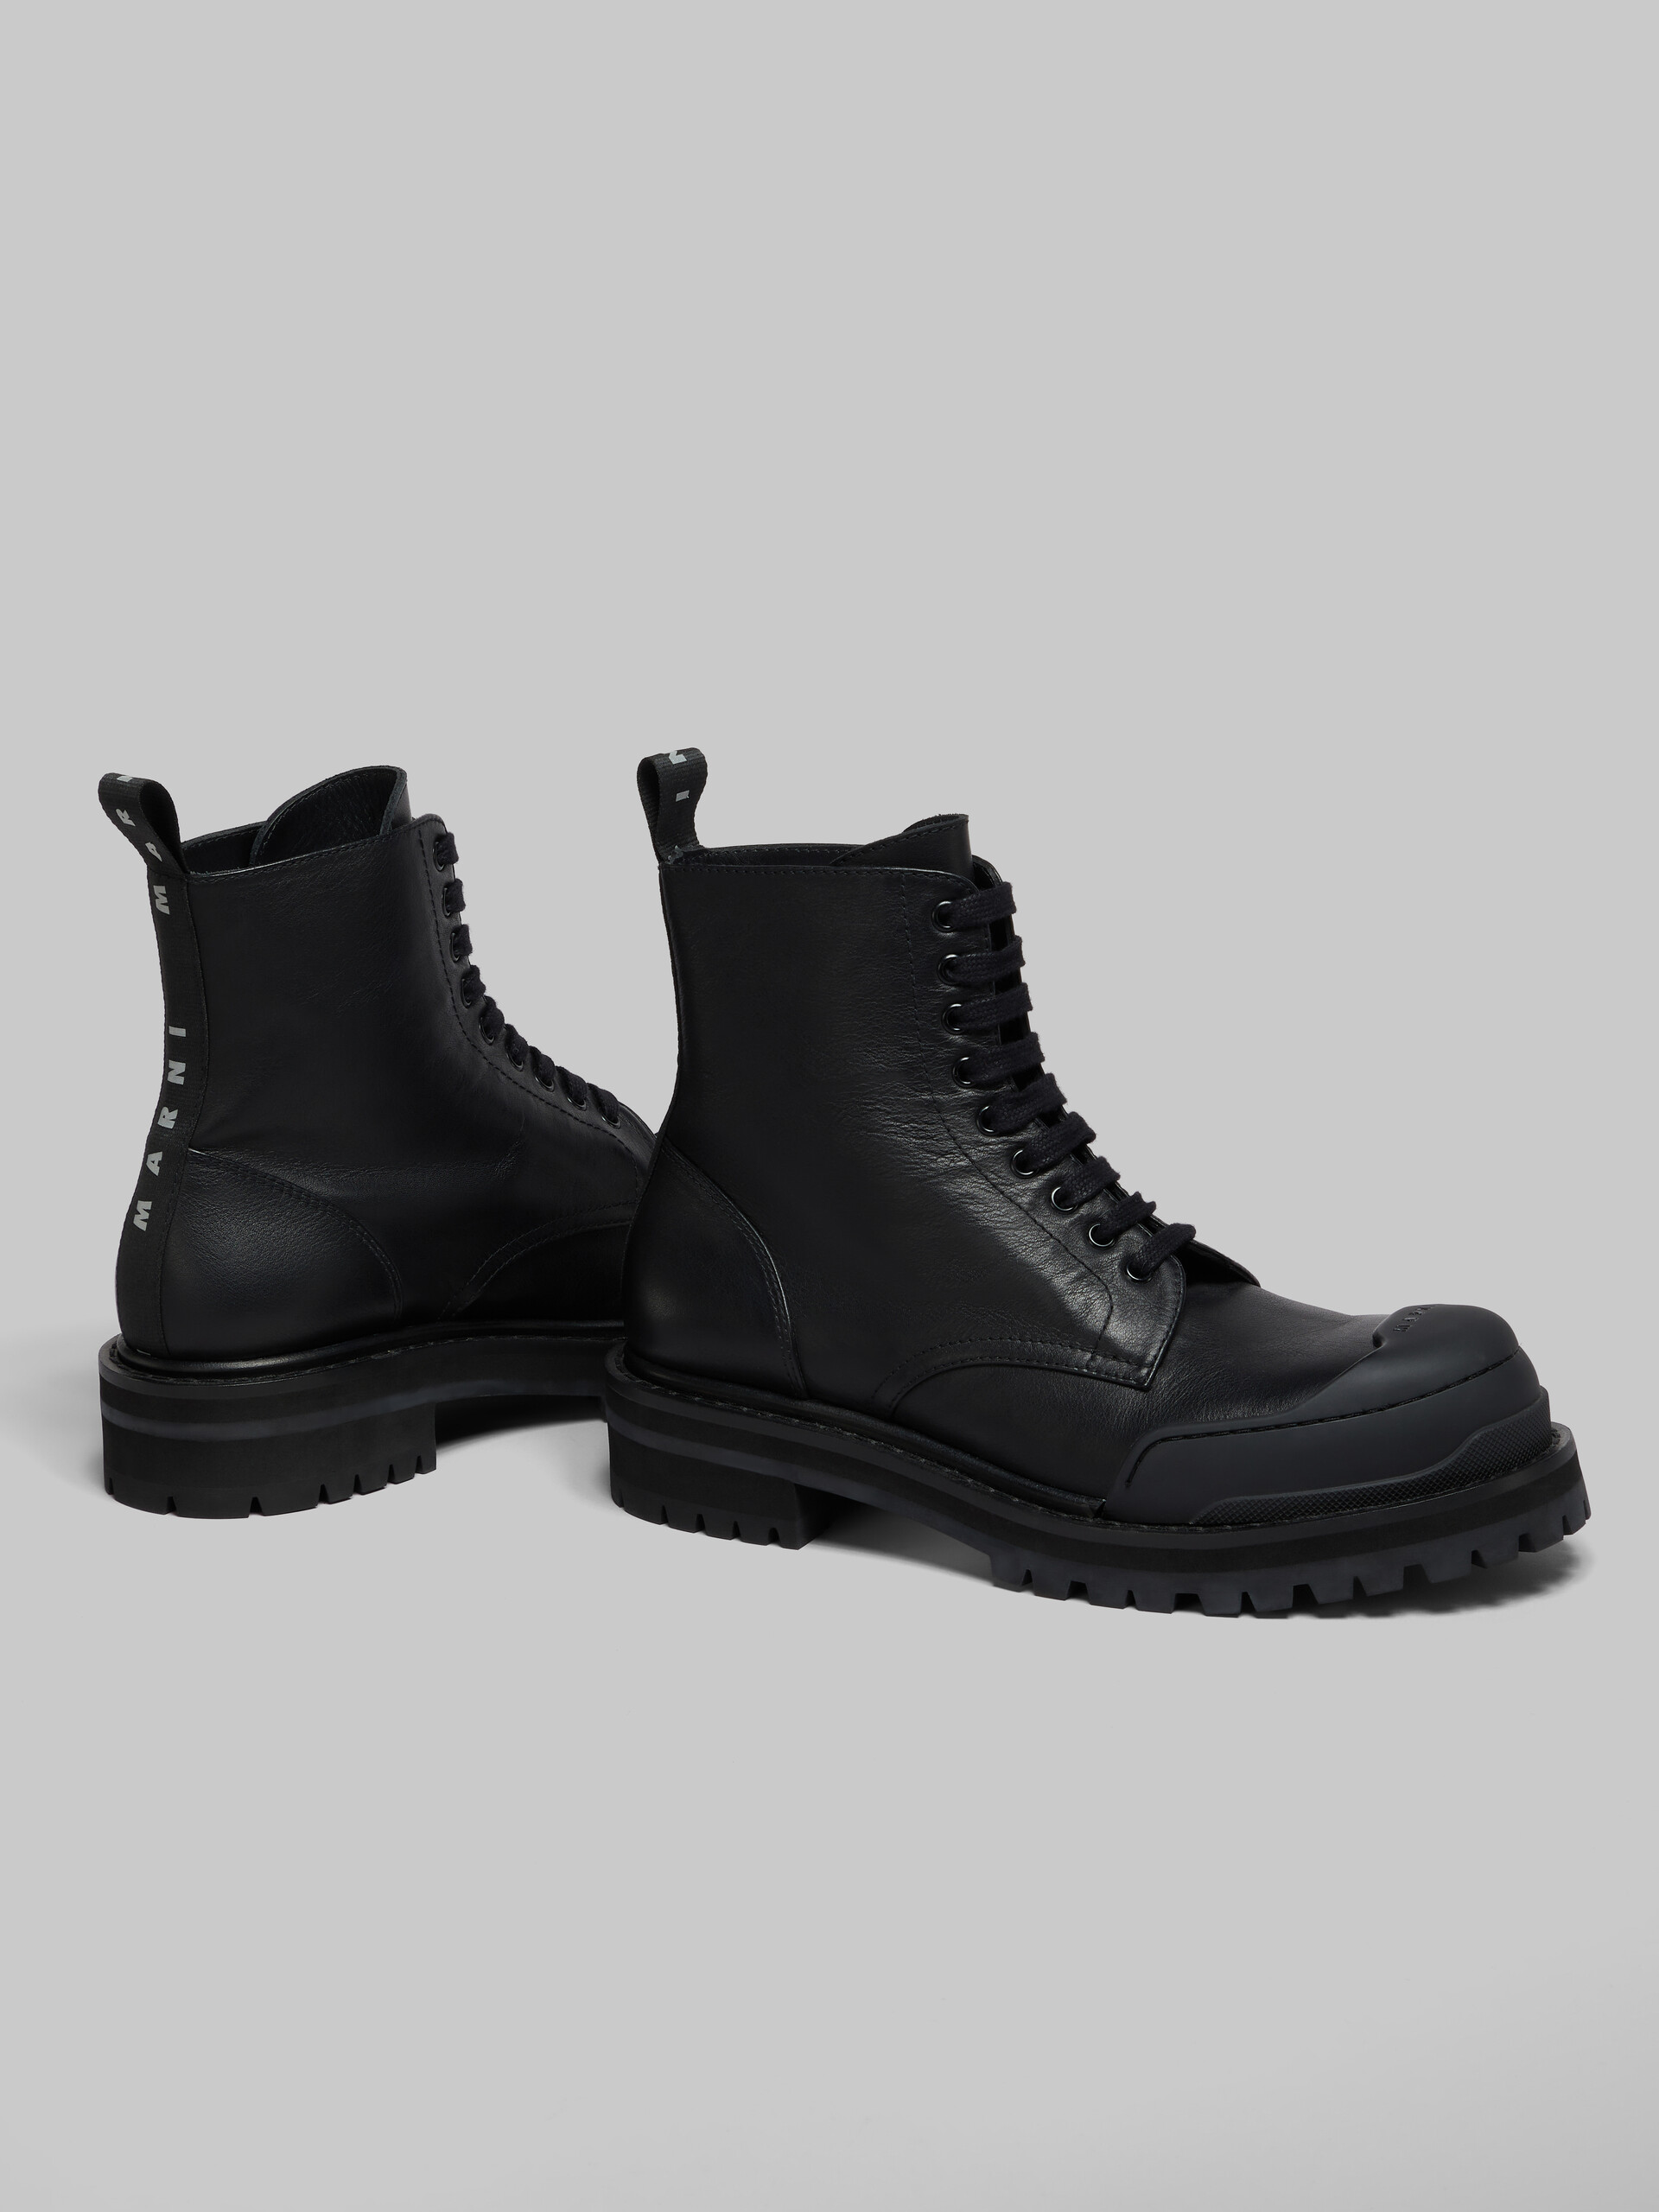 Black leather Dada Army combat boot - Boots - Image 4